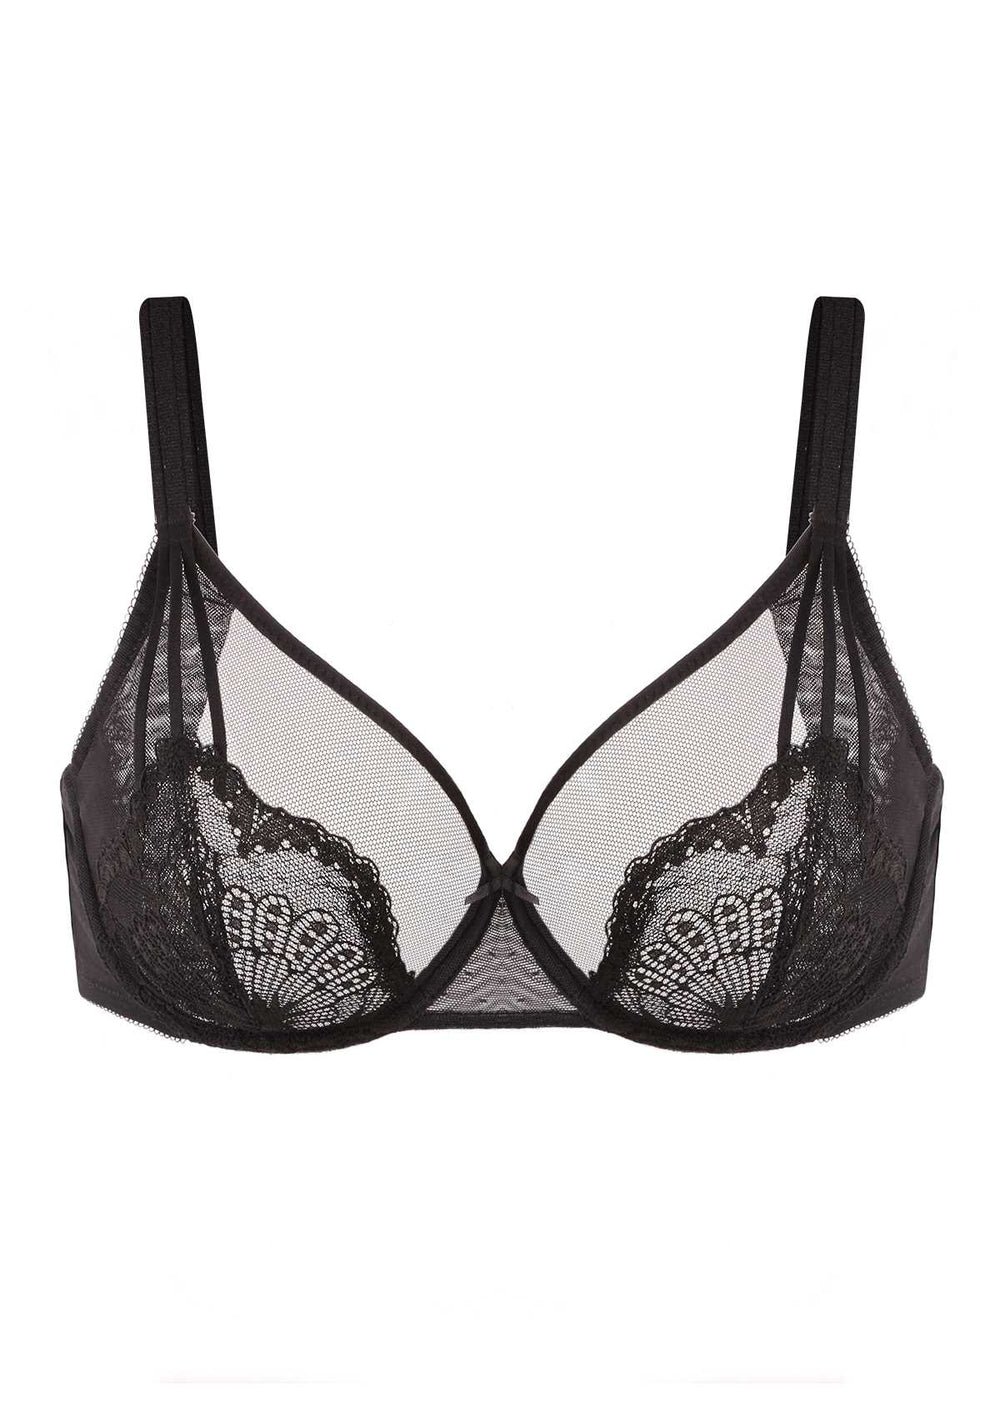 50% Off HSIA Bras & Underwear, Minimizer & Full-Coverage Styles Just  $17.50 (Regularly $35)